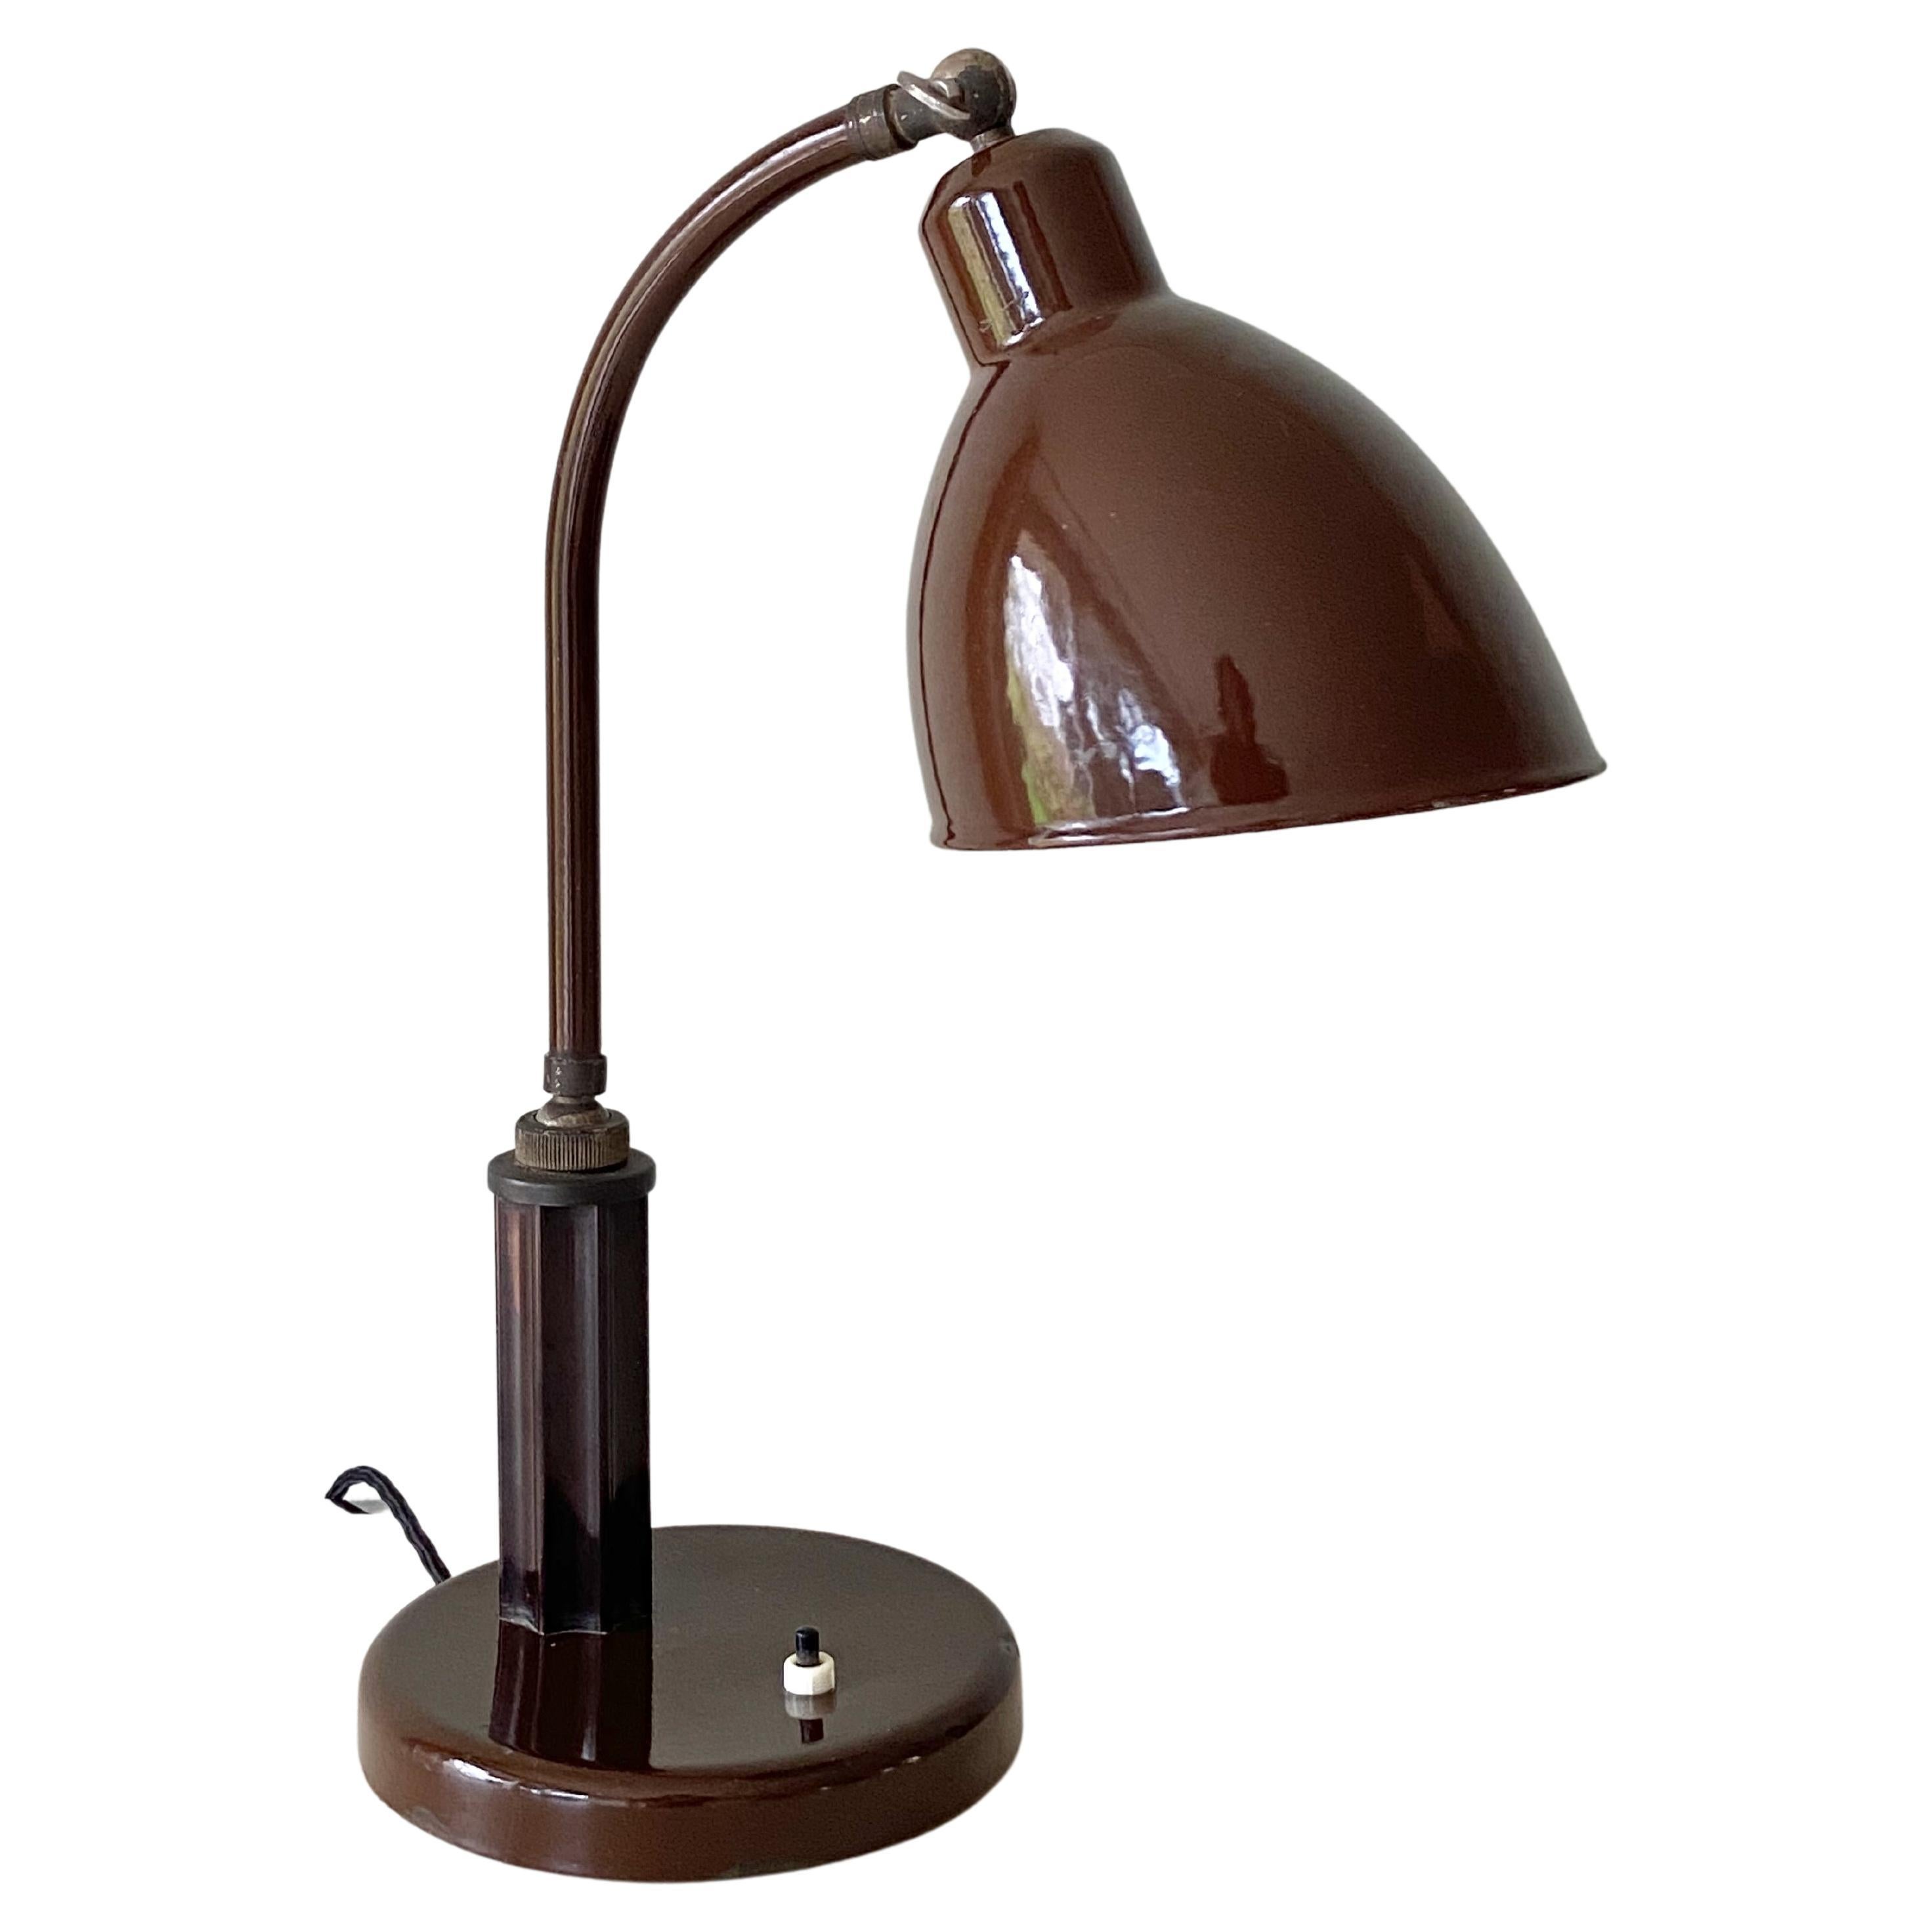 Molitor Grapholux Lamp Brown Enamel and Bakelite Stick by Christian Dell 1930s For Sale